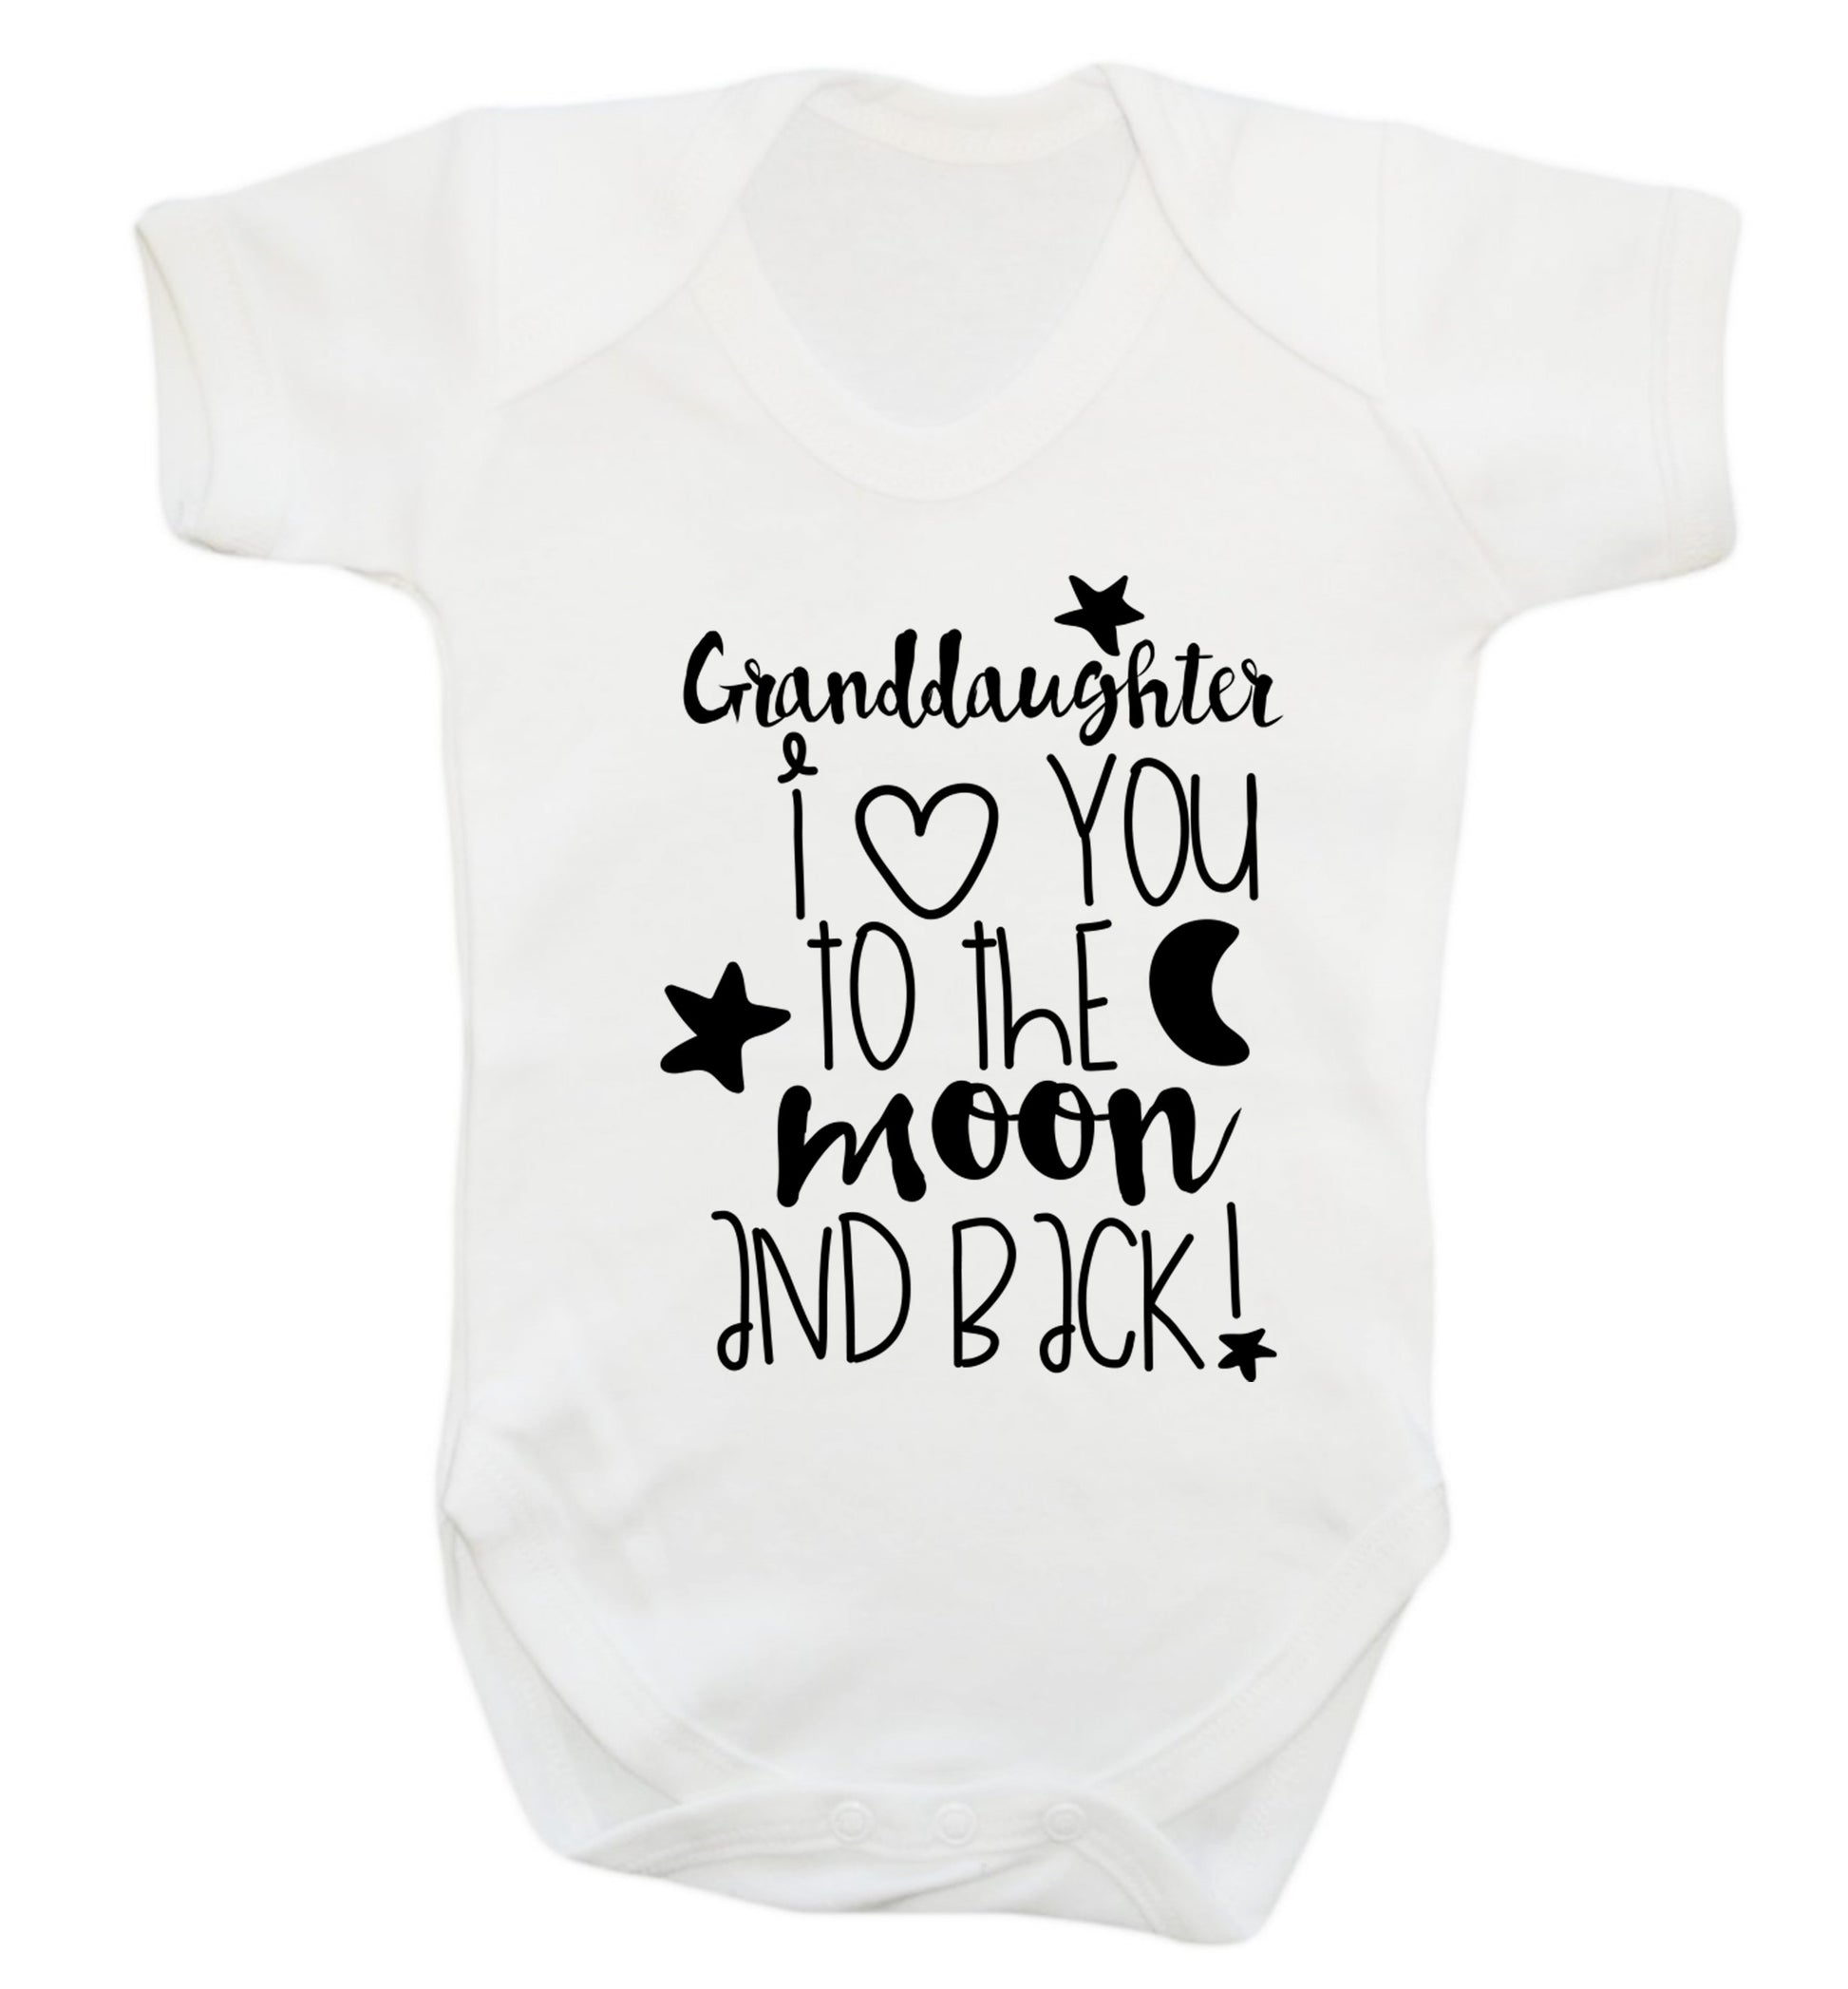 Granddaughter I love you to the moon and back Baby Vest white 18-24 months